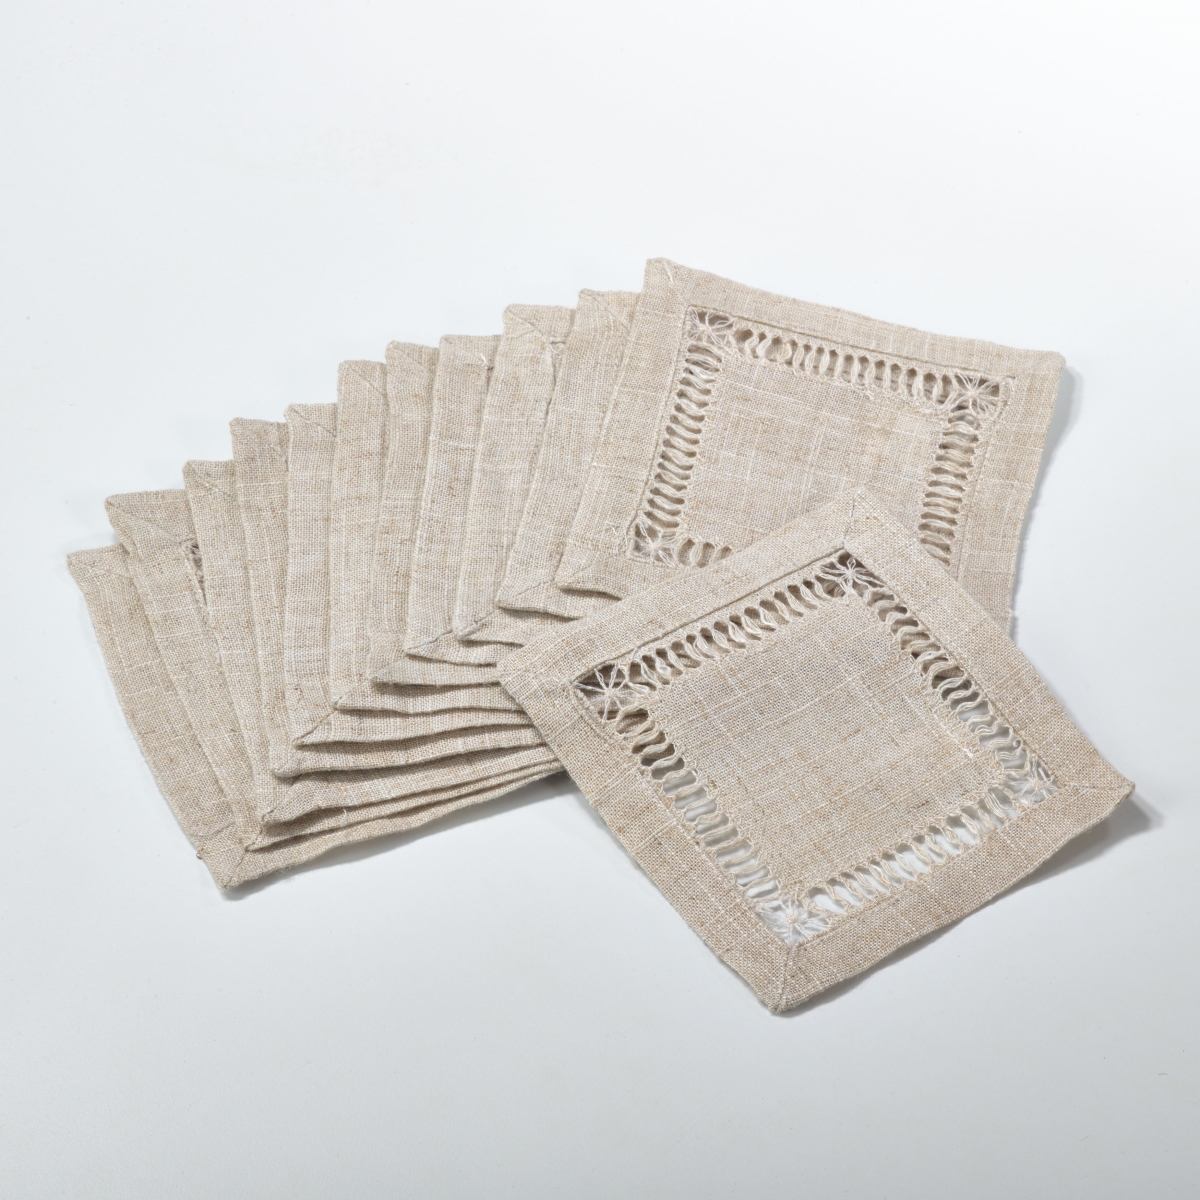 731.n6s 6 In. Square Hemstitched Coaster - Natural, Set Of 12